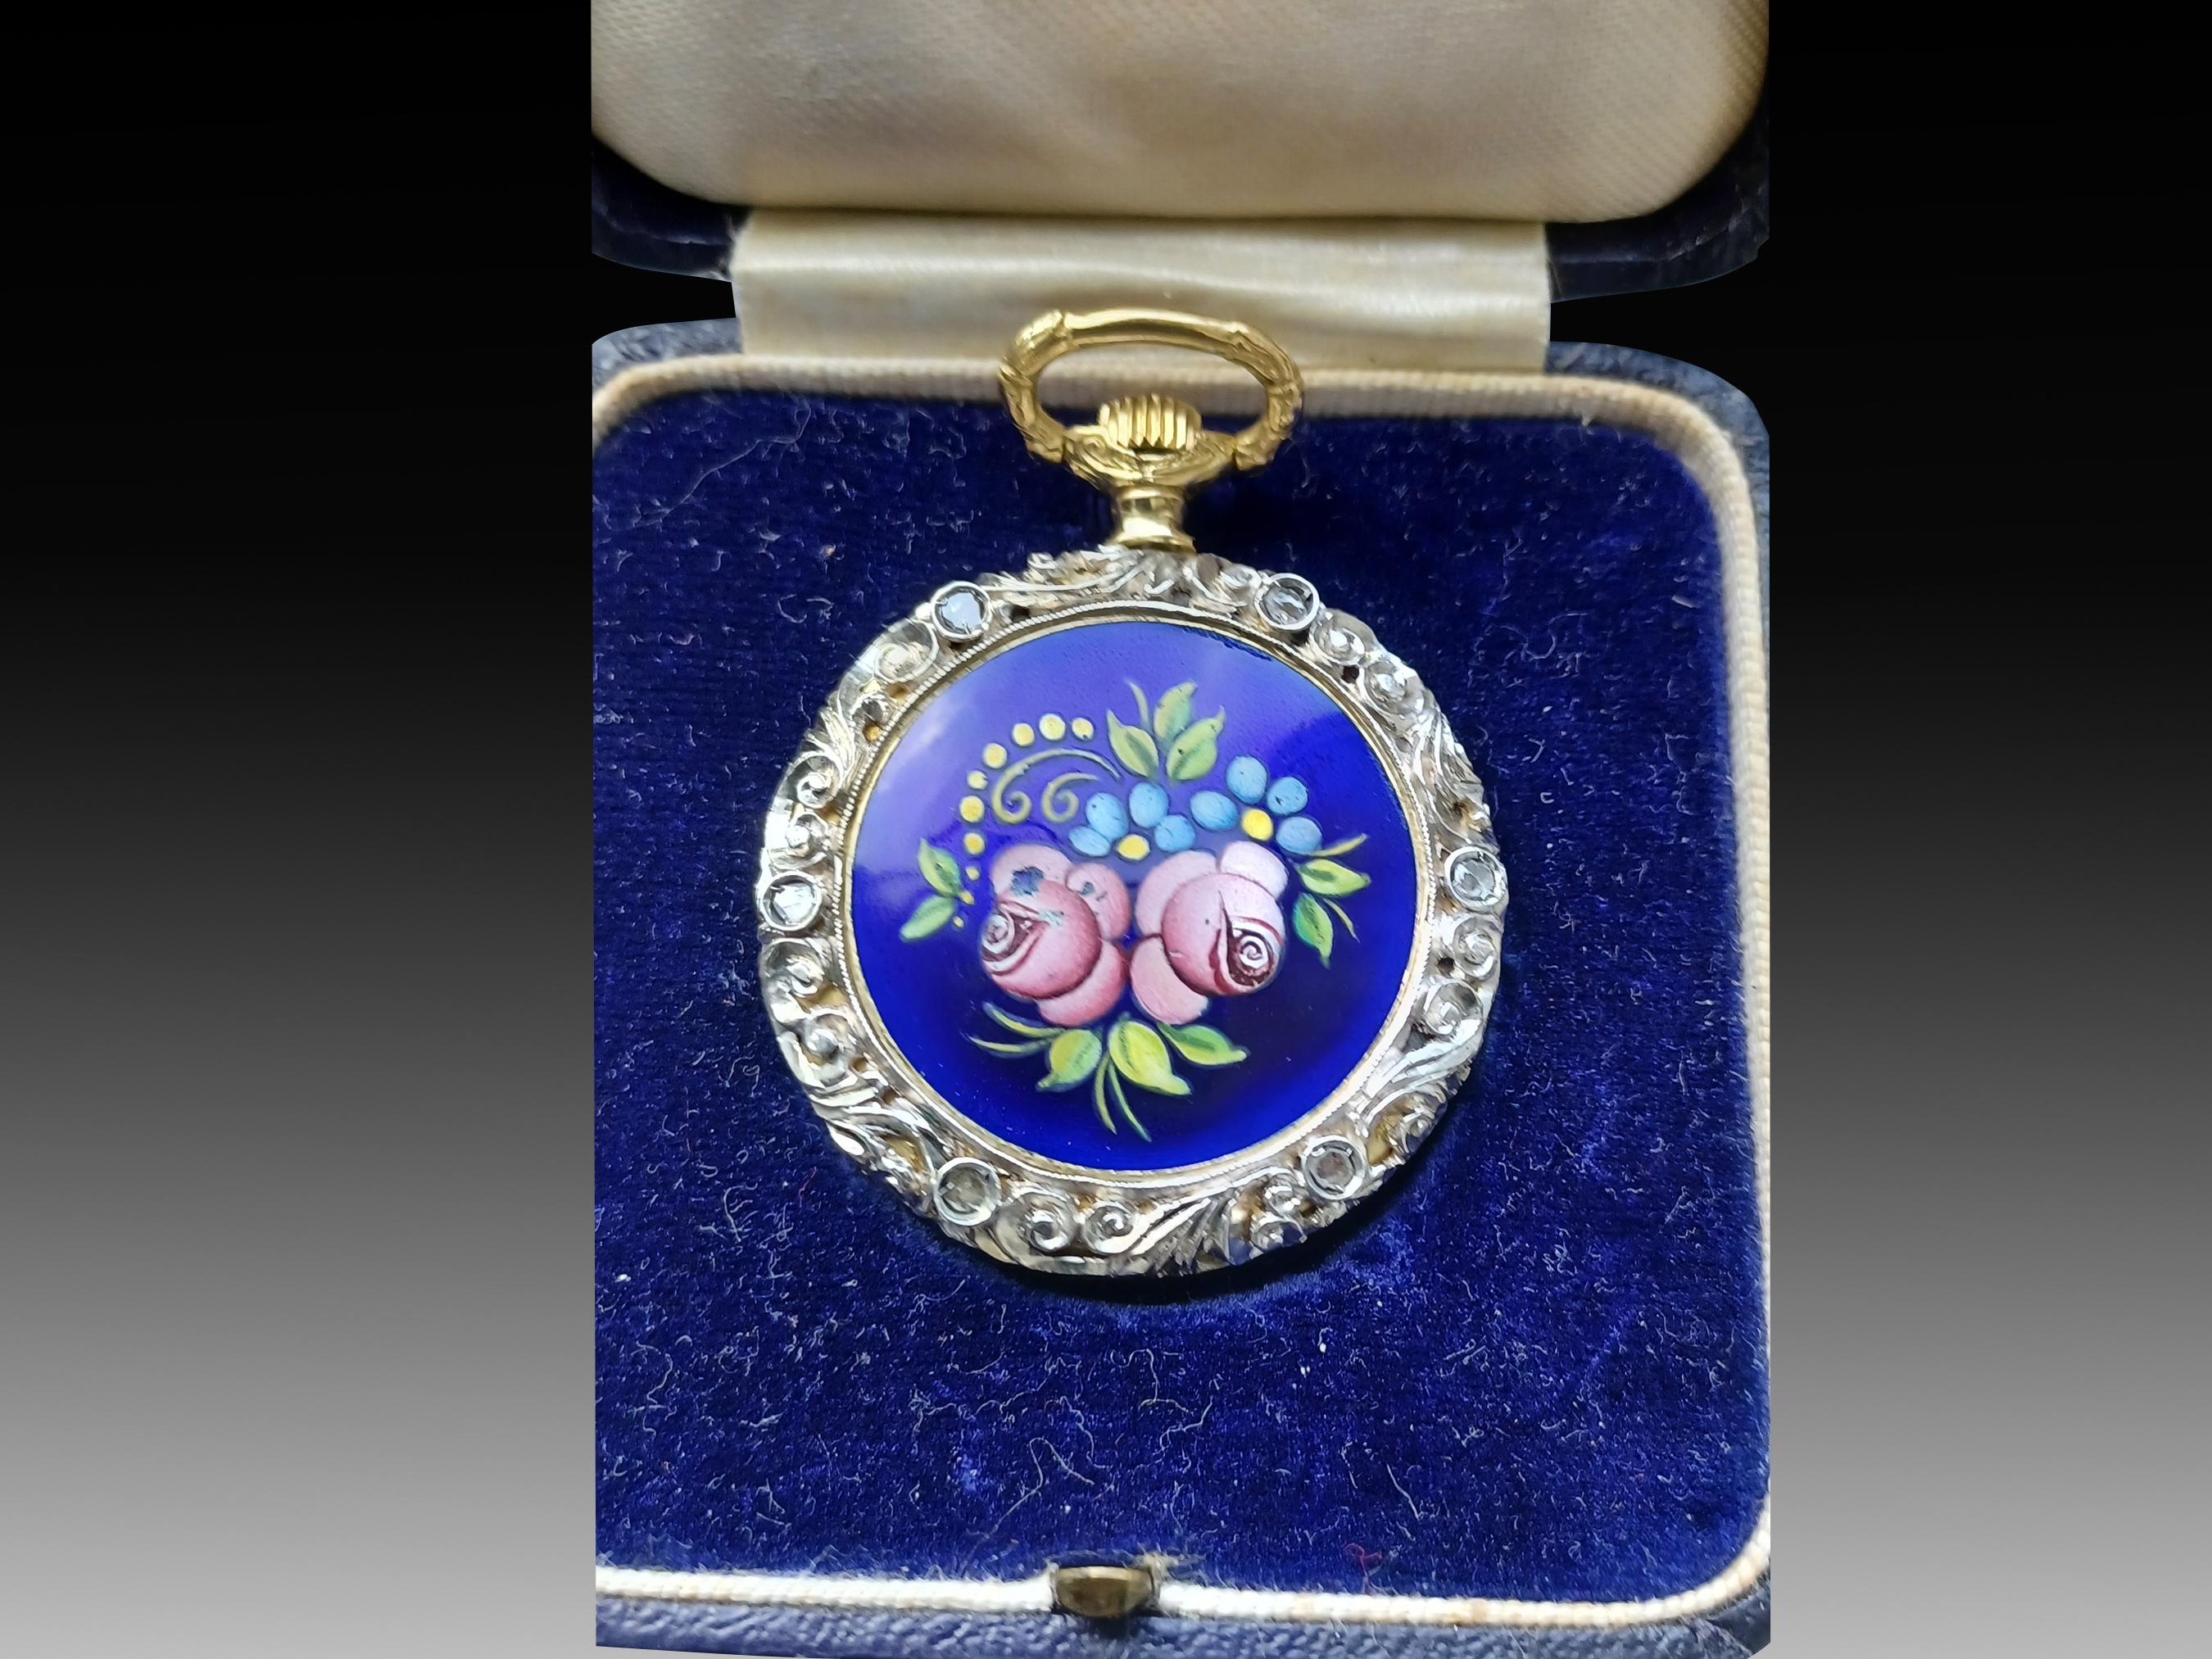 Rare 18ct Ruby and Diamond Pocket Watch with Elaborate Mountings and Jewels For Sale 4